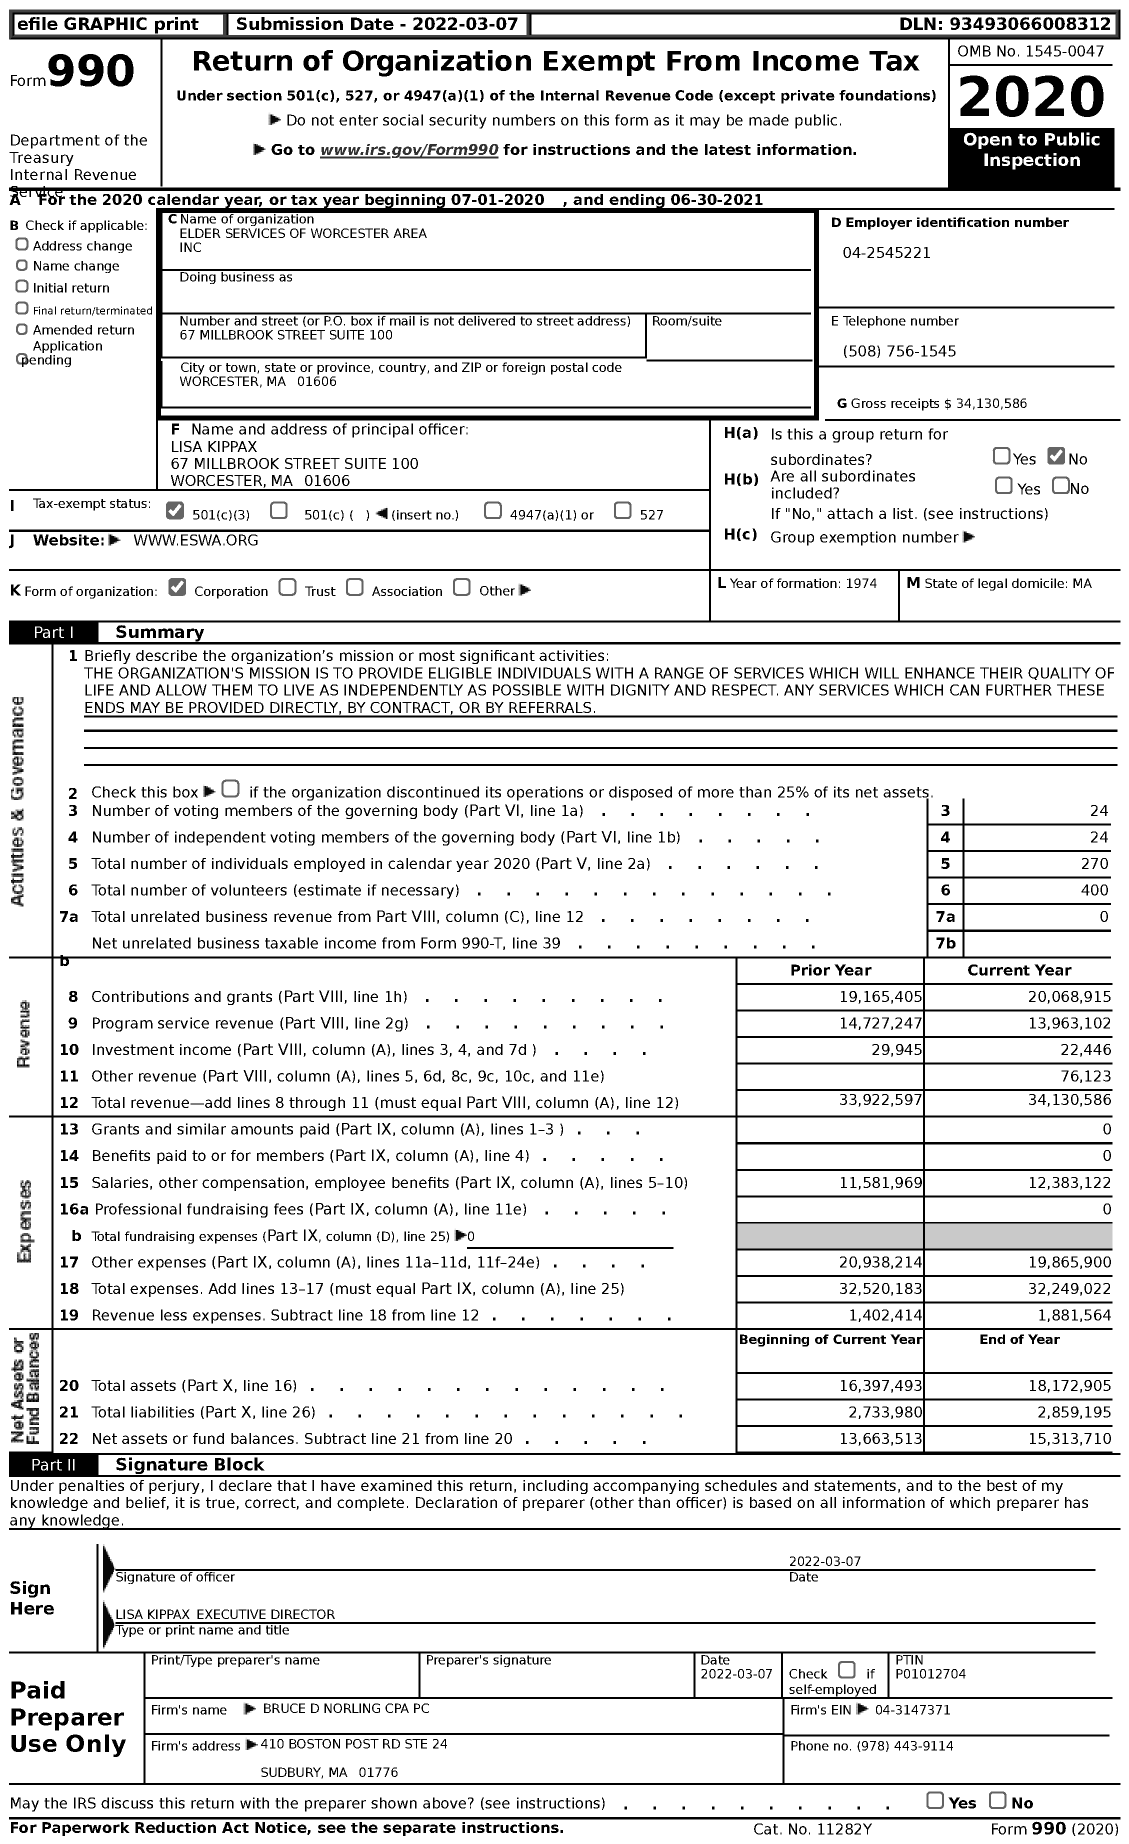 Image of first page of 2020 Form 990 for Elder Services of Worcester Area (ESWA)